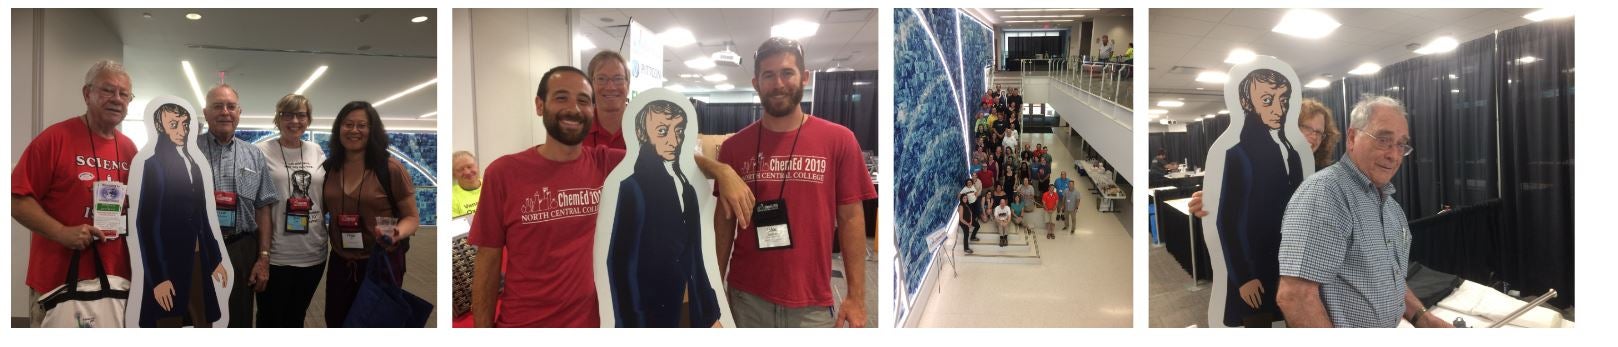 A collection of pictures from ChemEd 2019 showing Avogadro the cutout with various attendees.